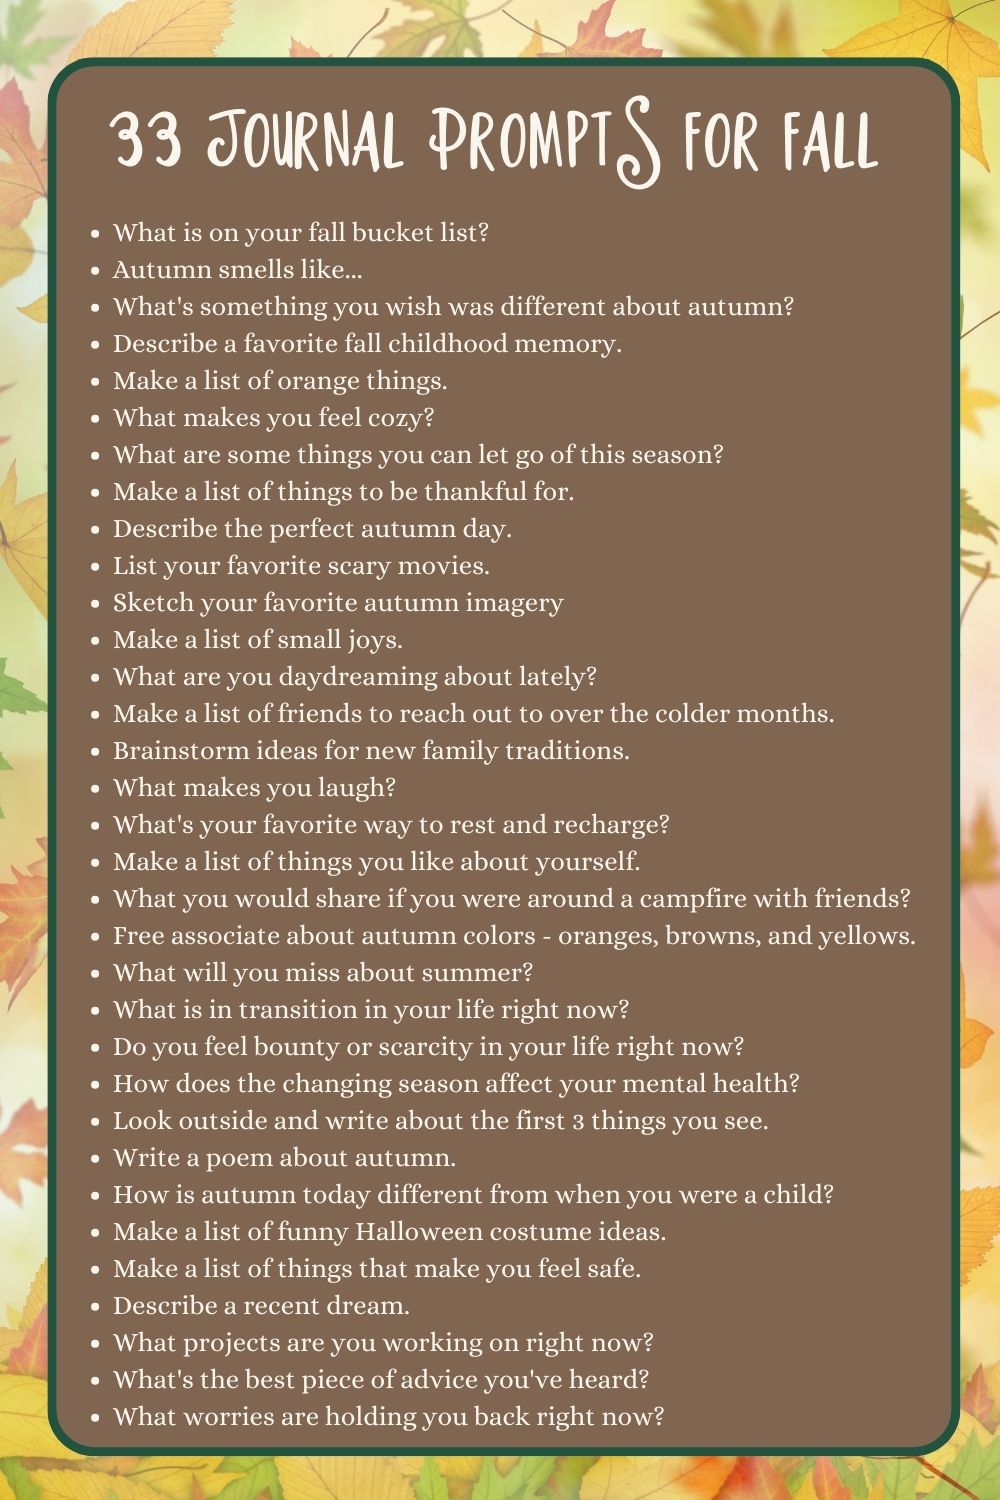 33 journal prompts for fall